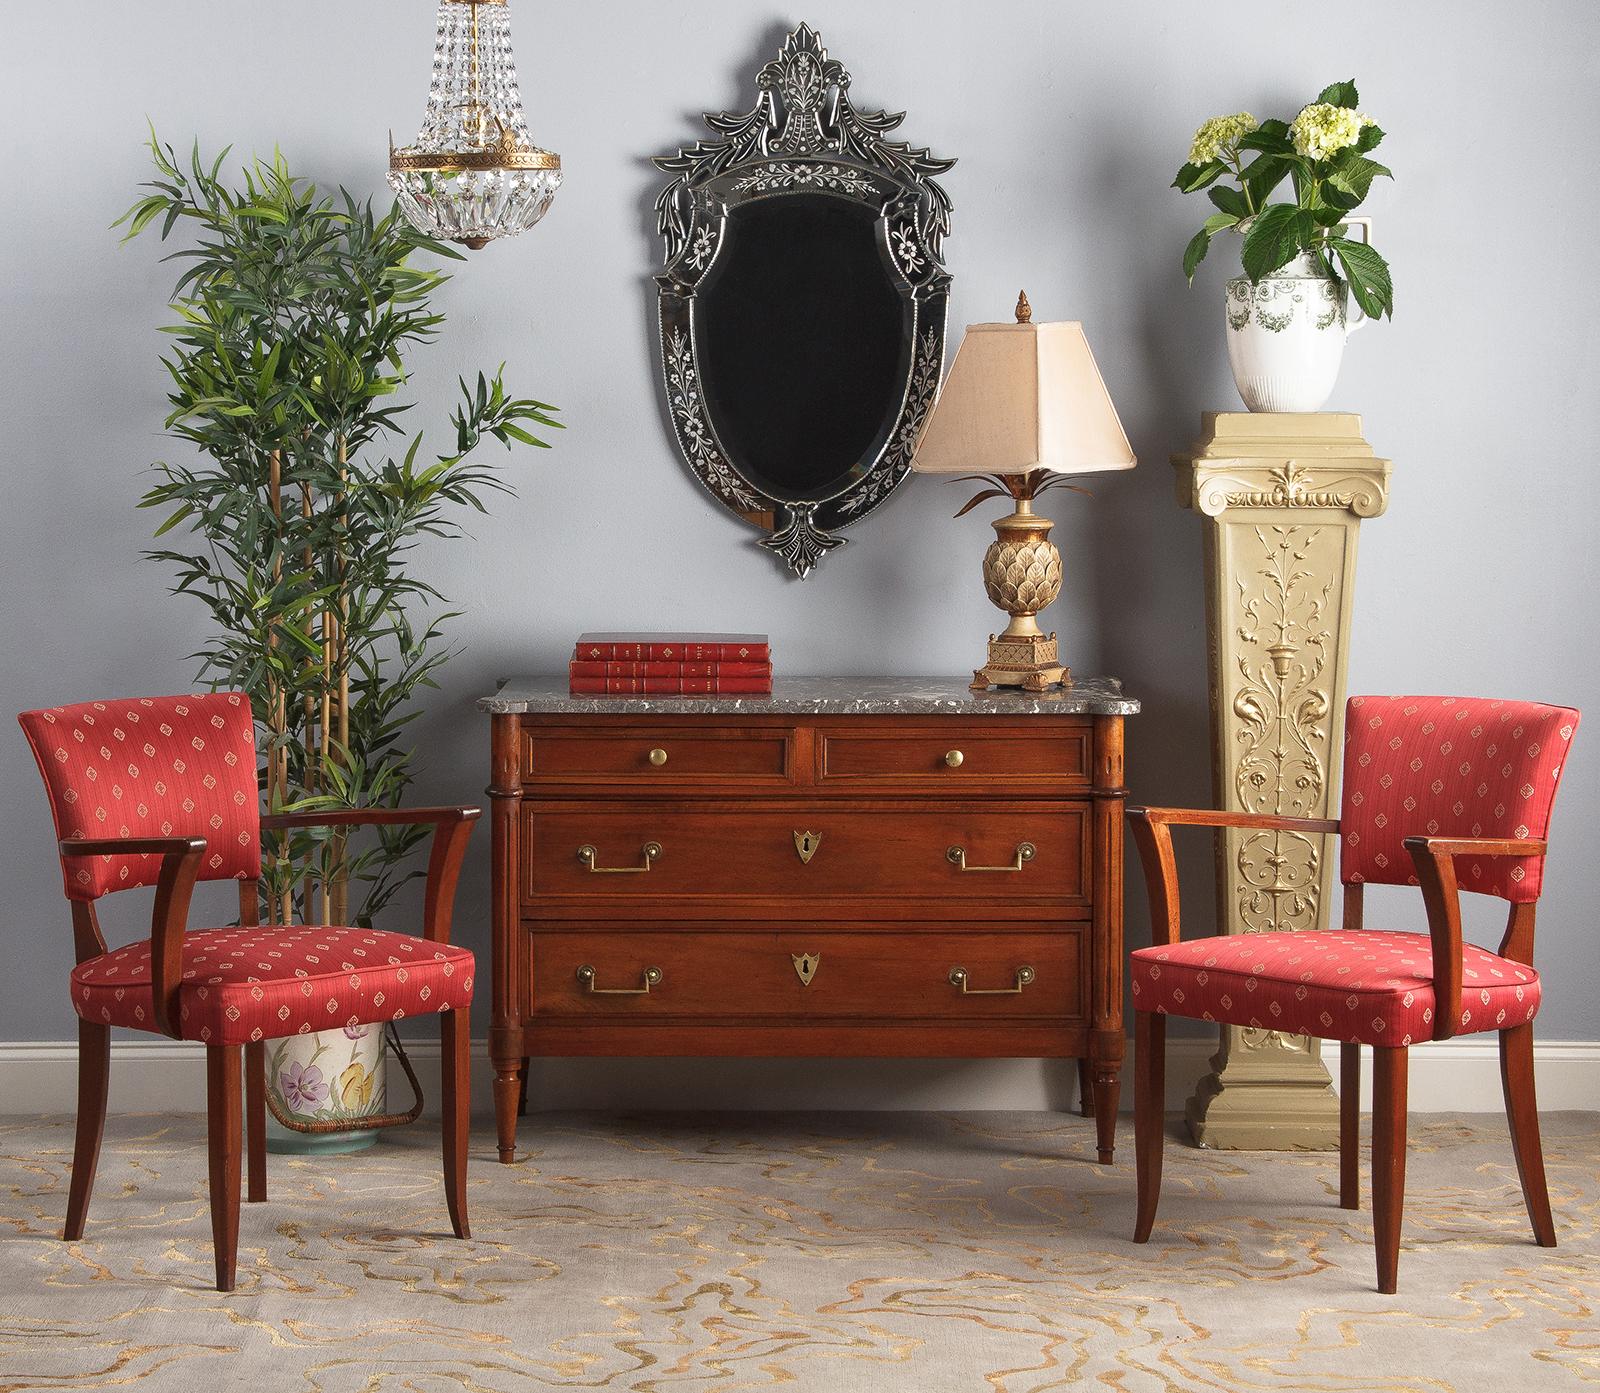 An outstanding pair of French bridge armchairs from the Art Deco period. Both armchairs have recently been re-upholstered in a patterned red fabric. The frames are stained beechwood with shapely curved front legs and armrests. This pair of bridge